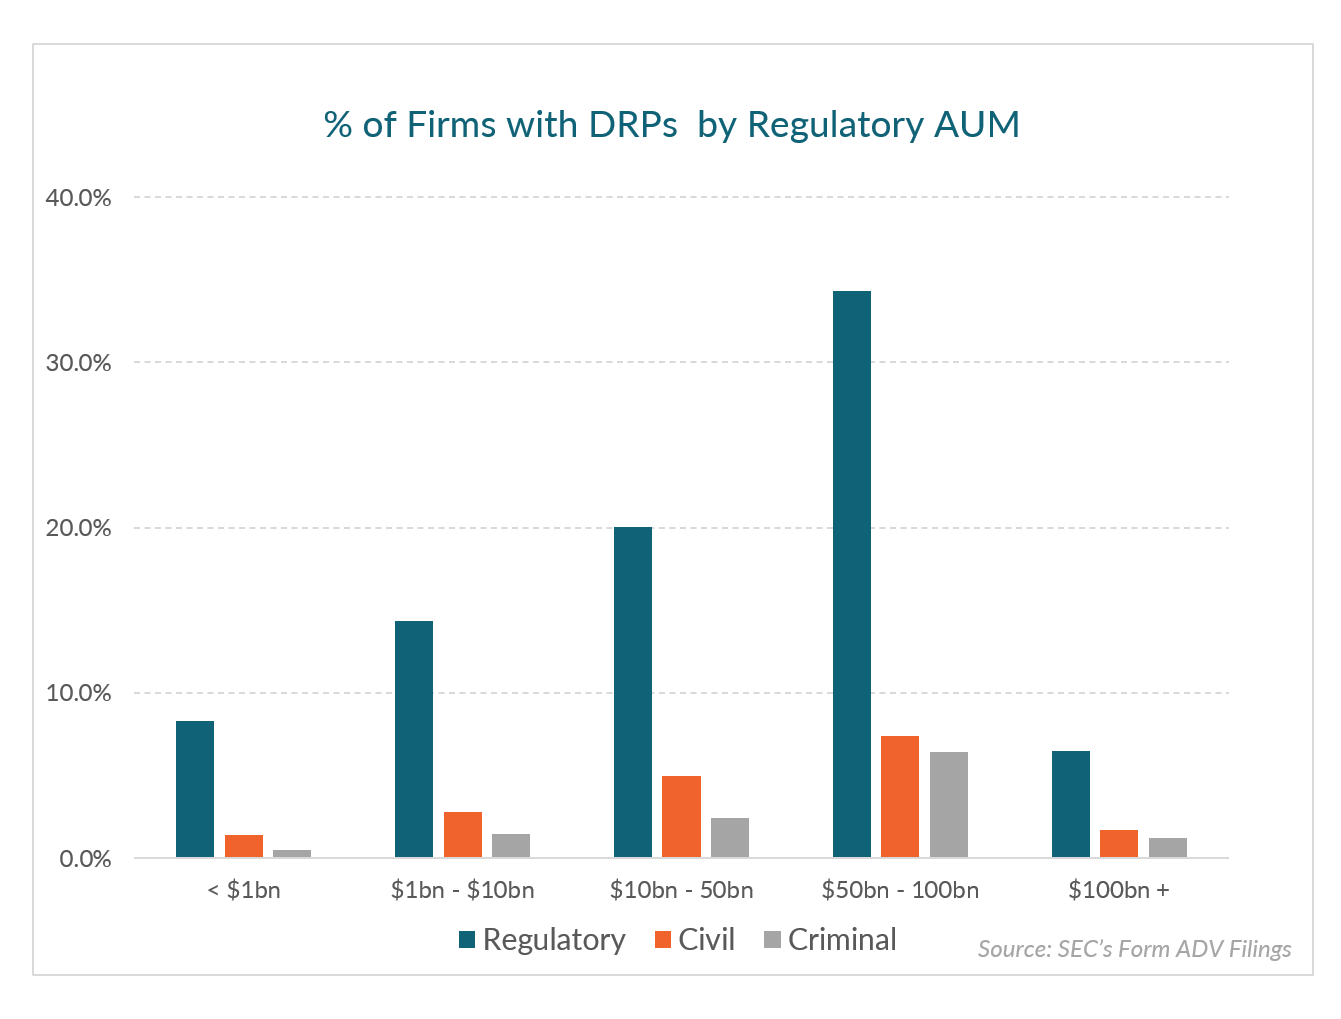 Firm with DRPs by regulatory AUM